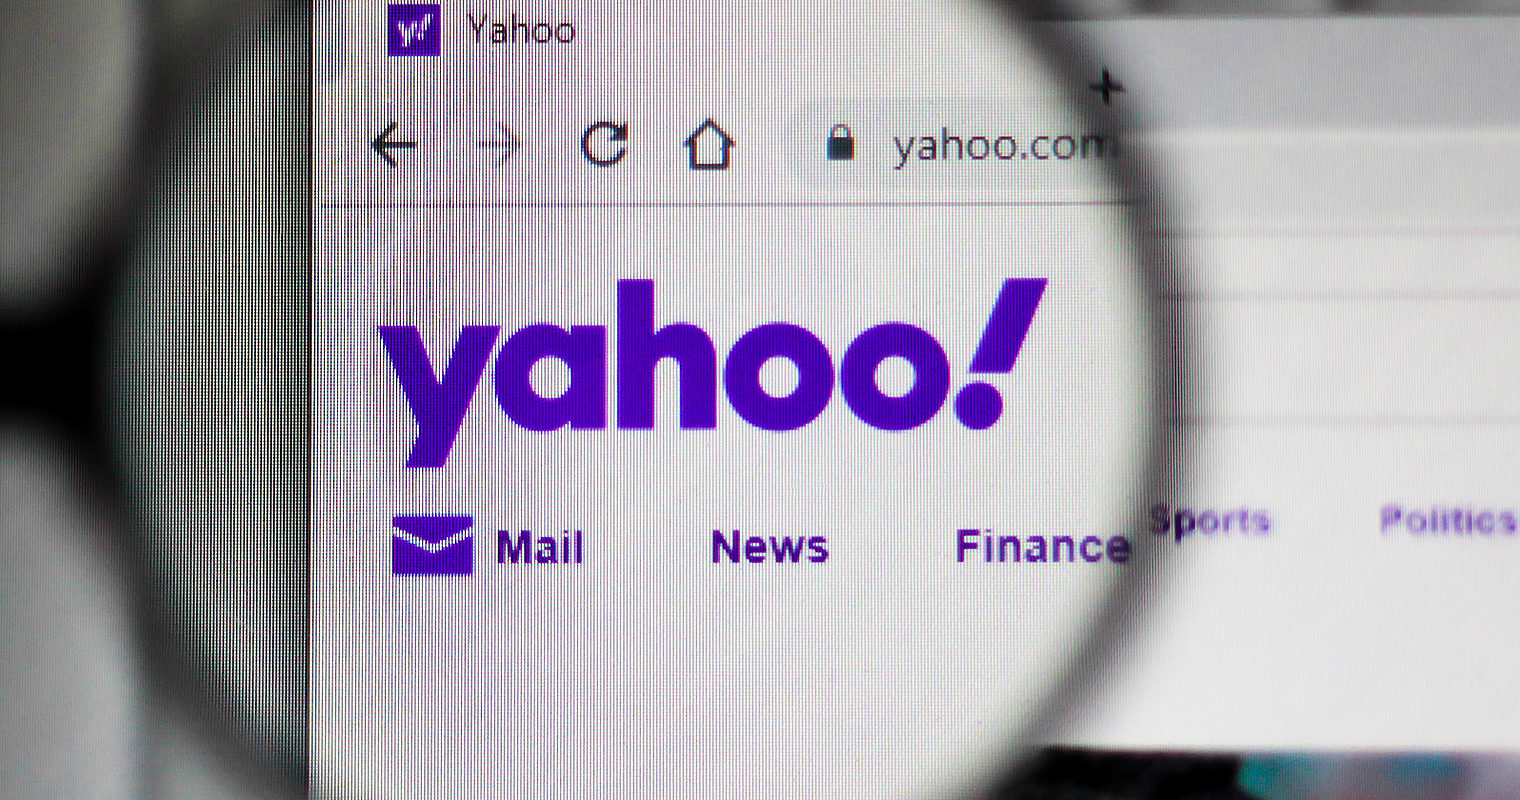 Yahoo Extends Deadline for Deletion of Yahoo Groups Data